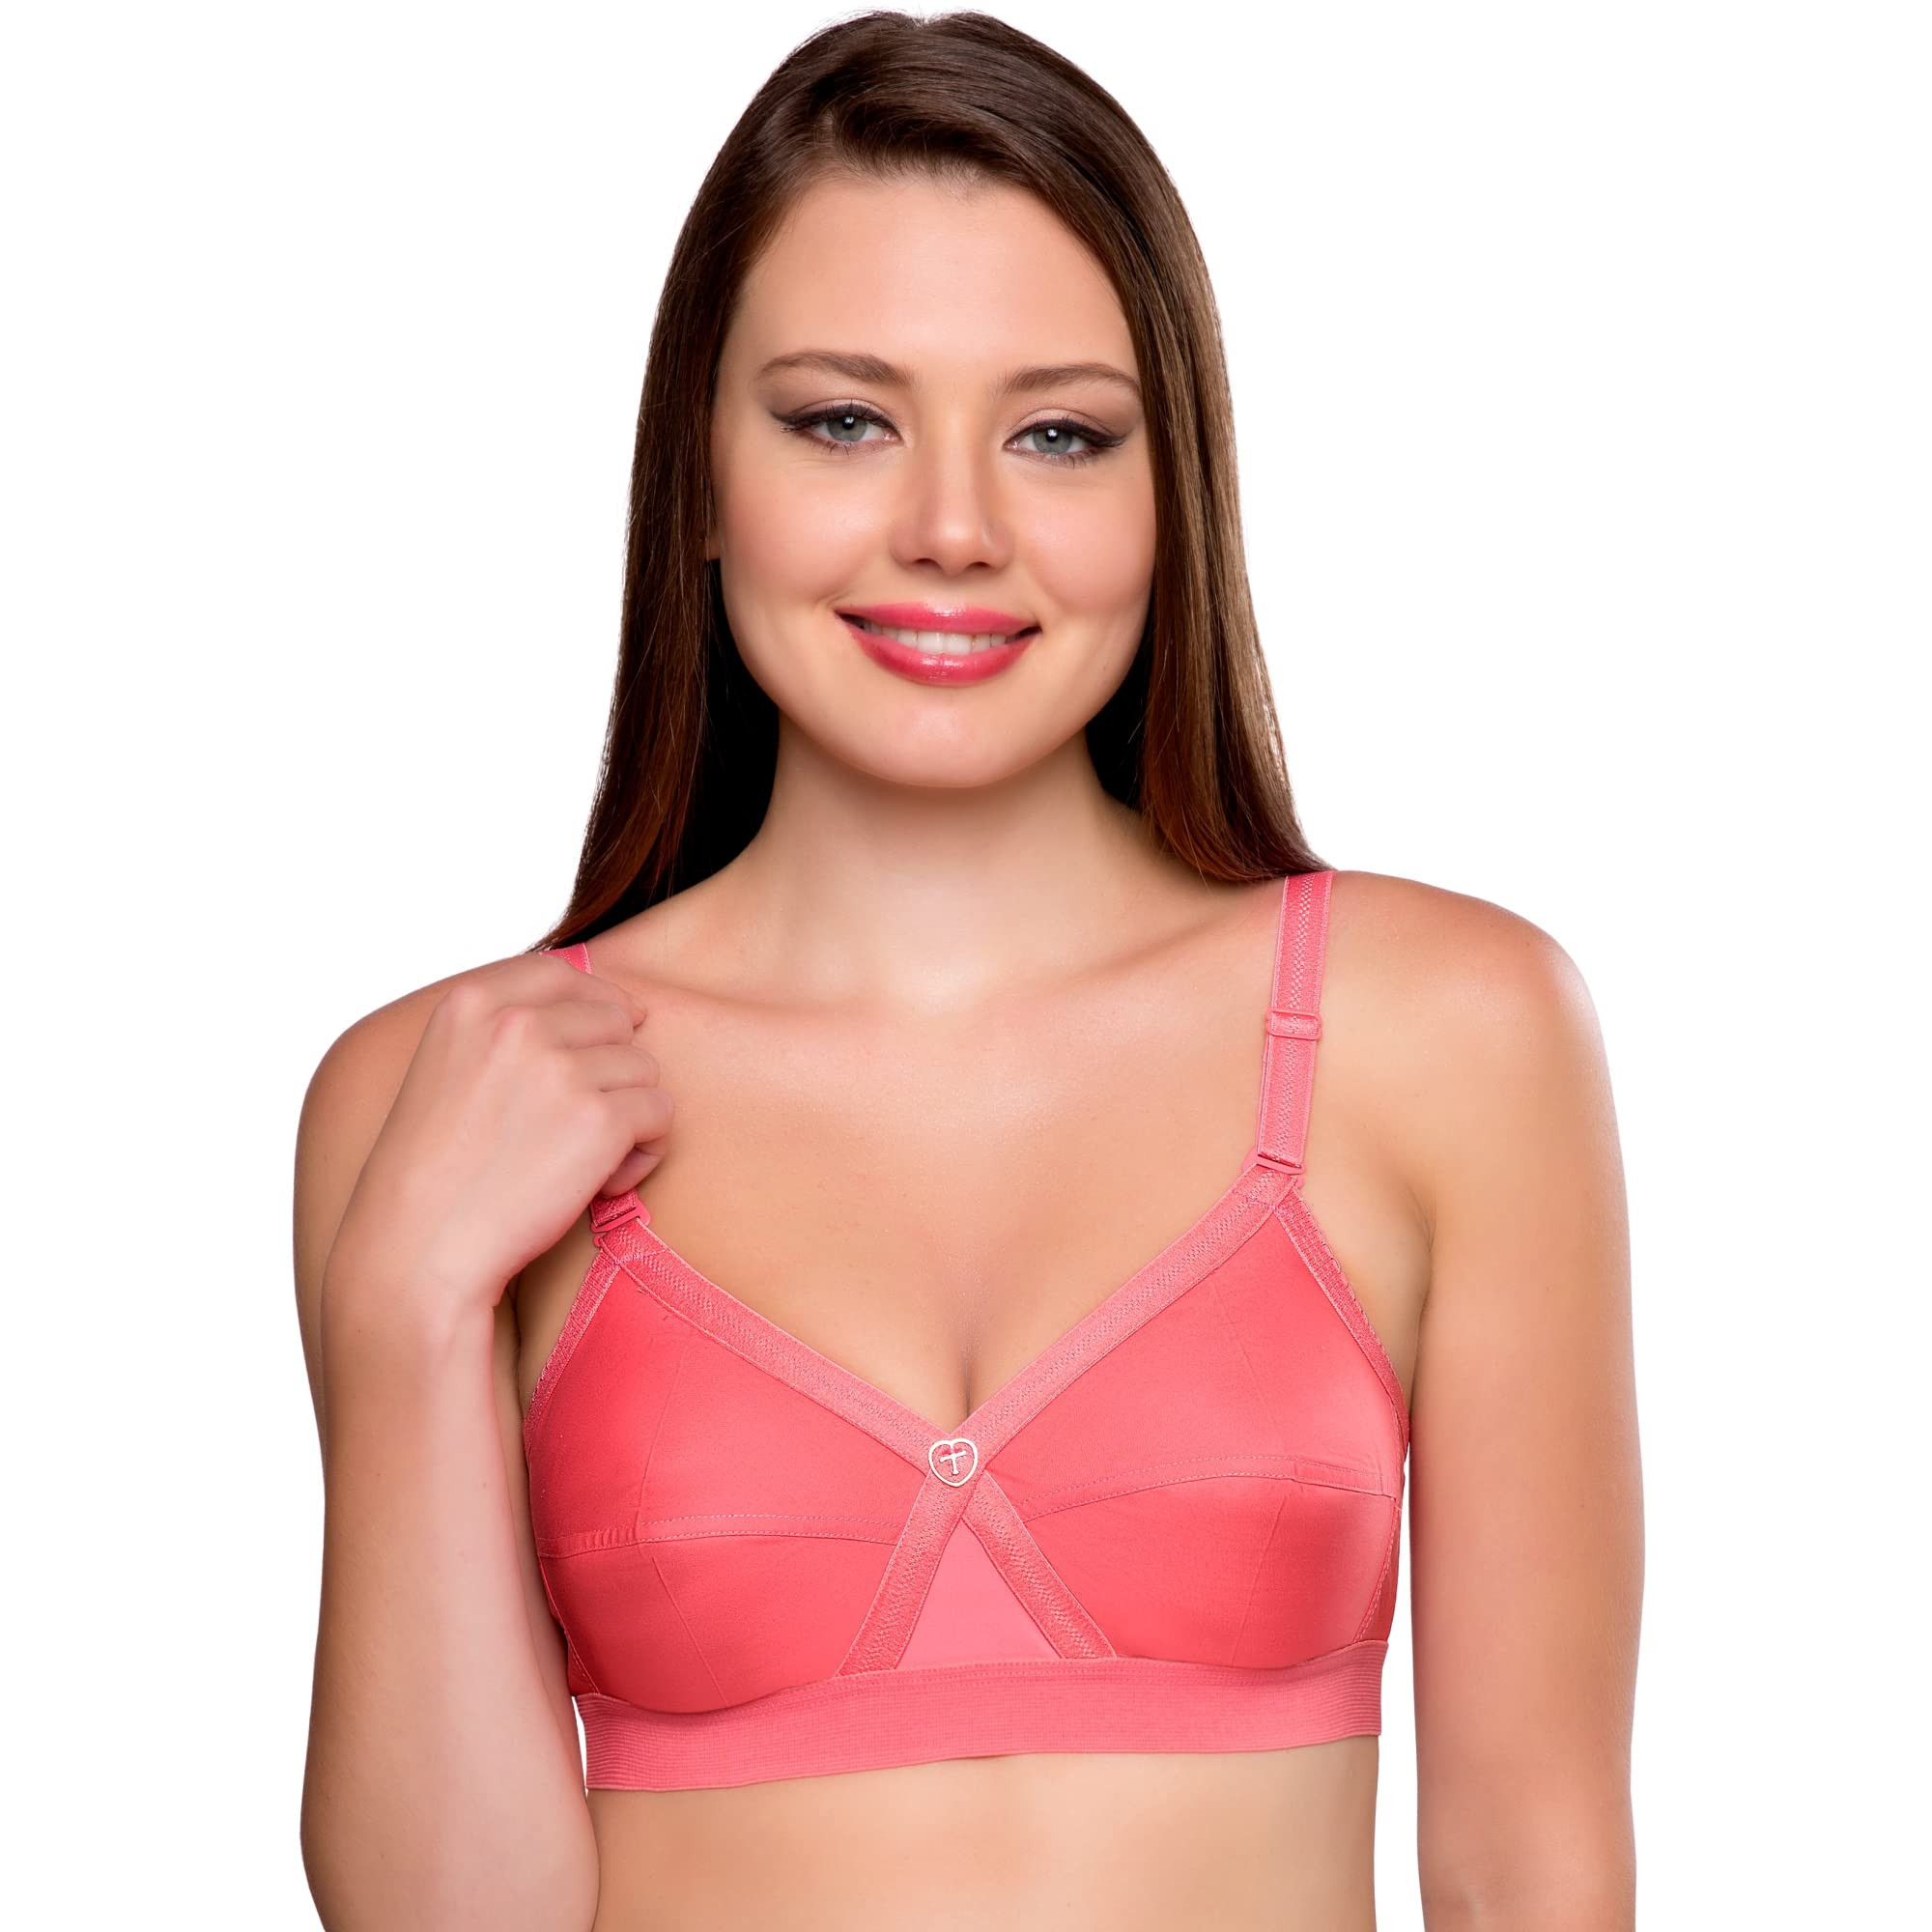 TRYLO KPL 36 Coral G - Cup,Size 36G